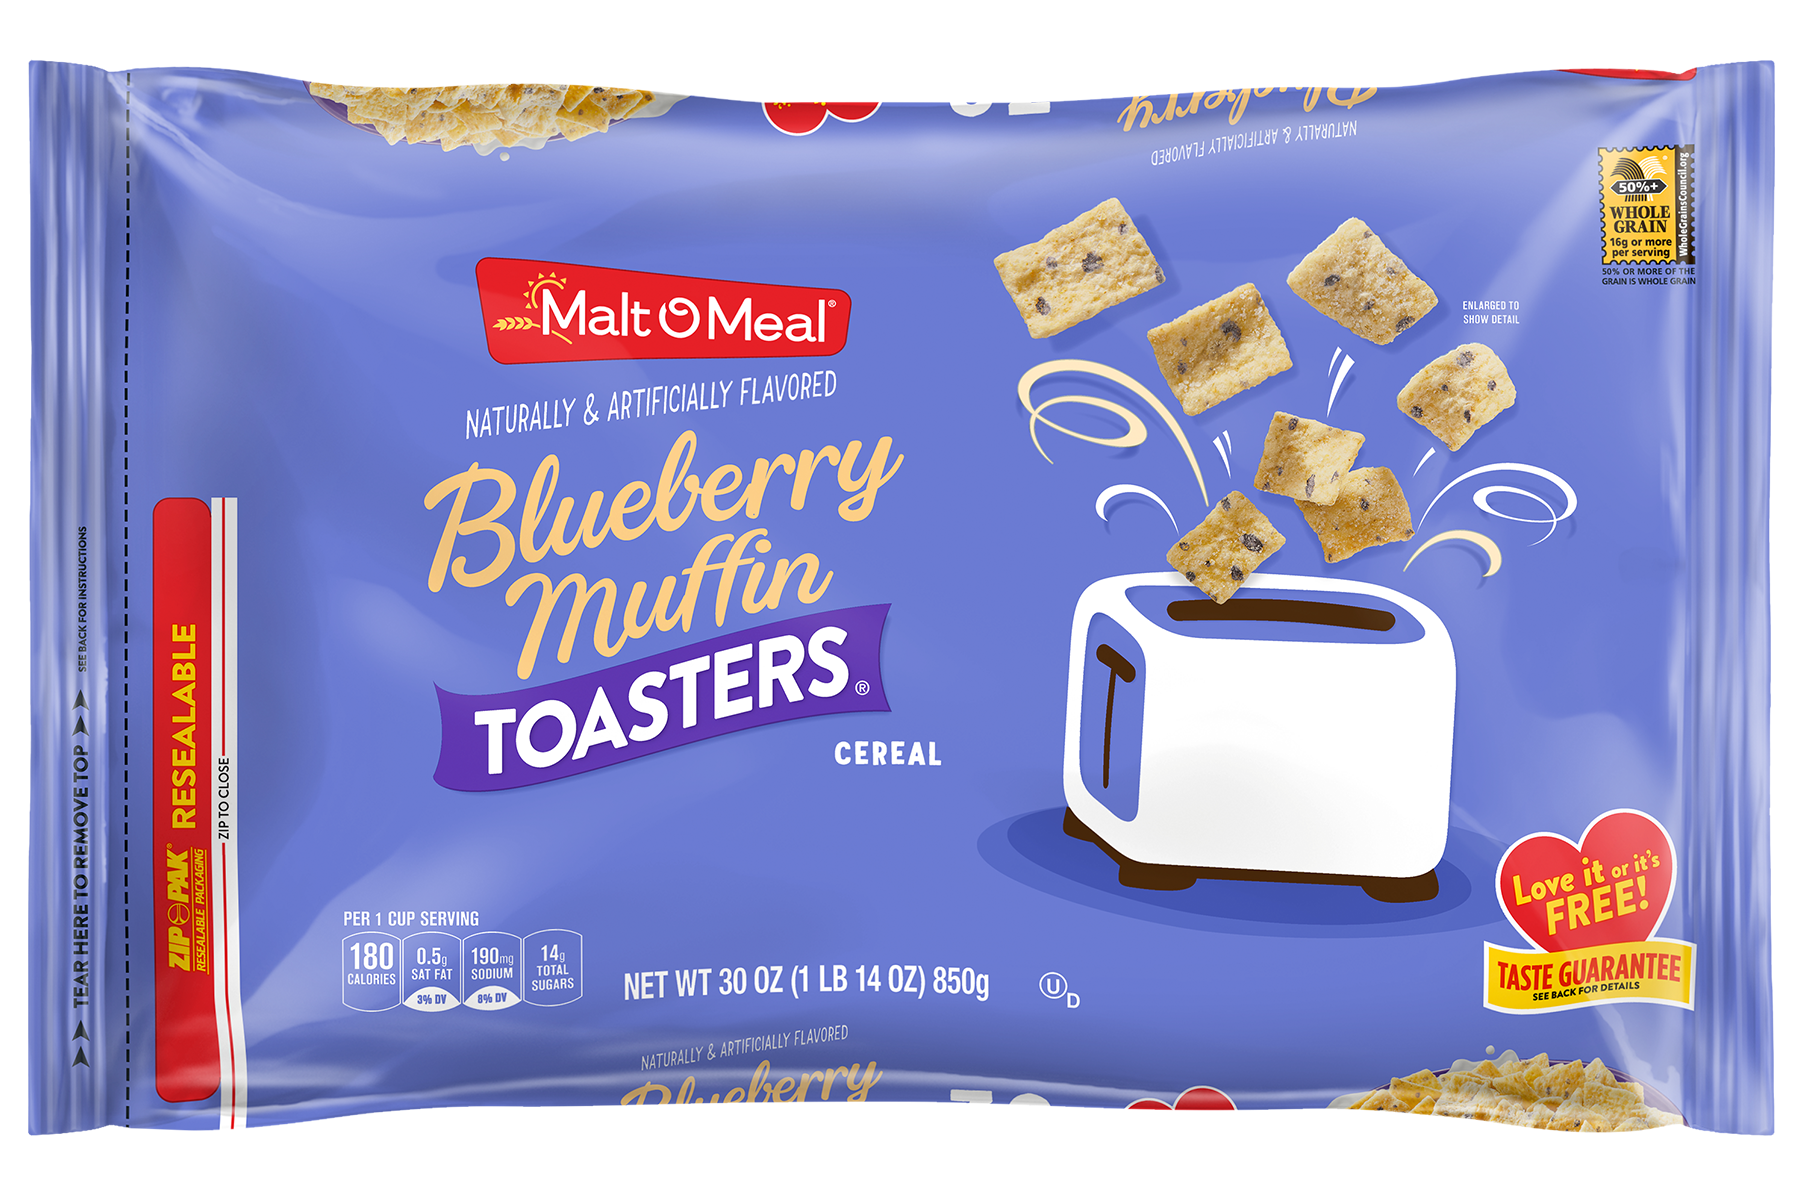 Malt-O-Meal Blueberry Muffin Toasters cereal bag